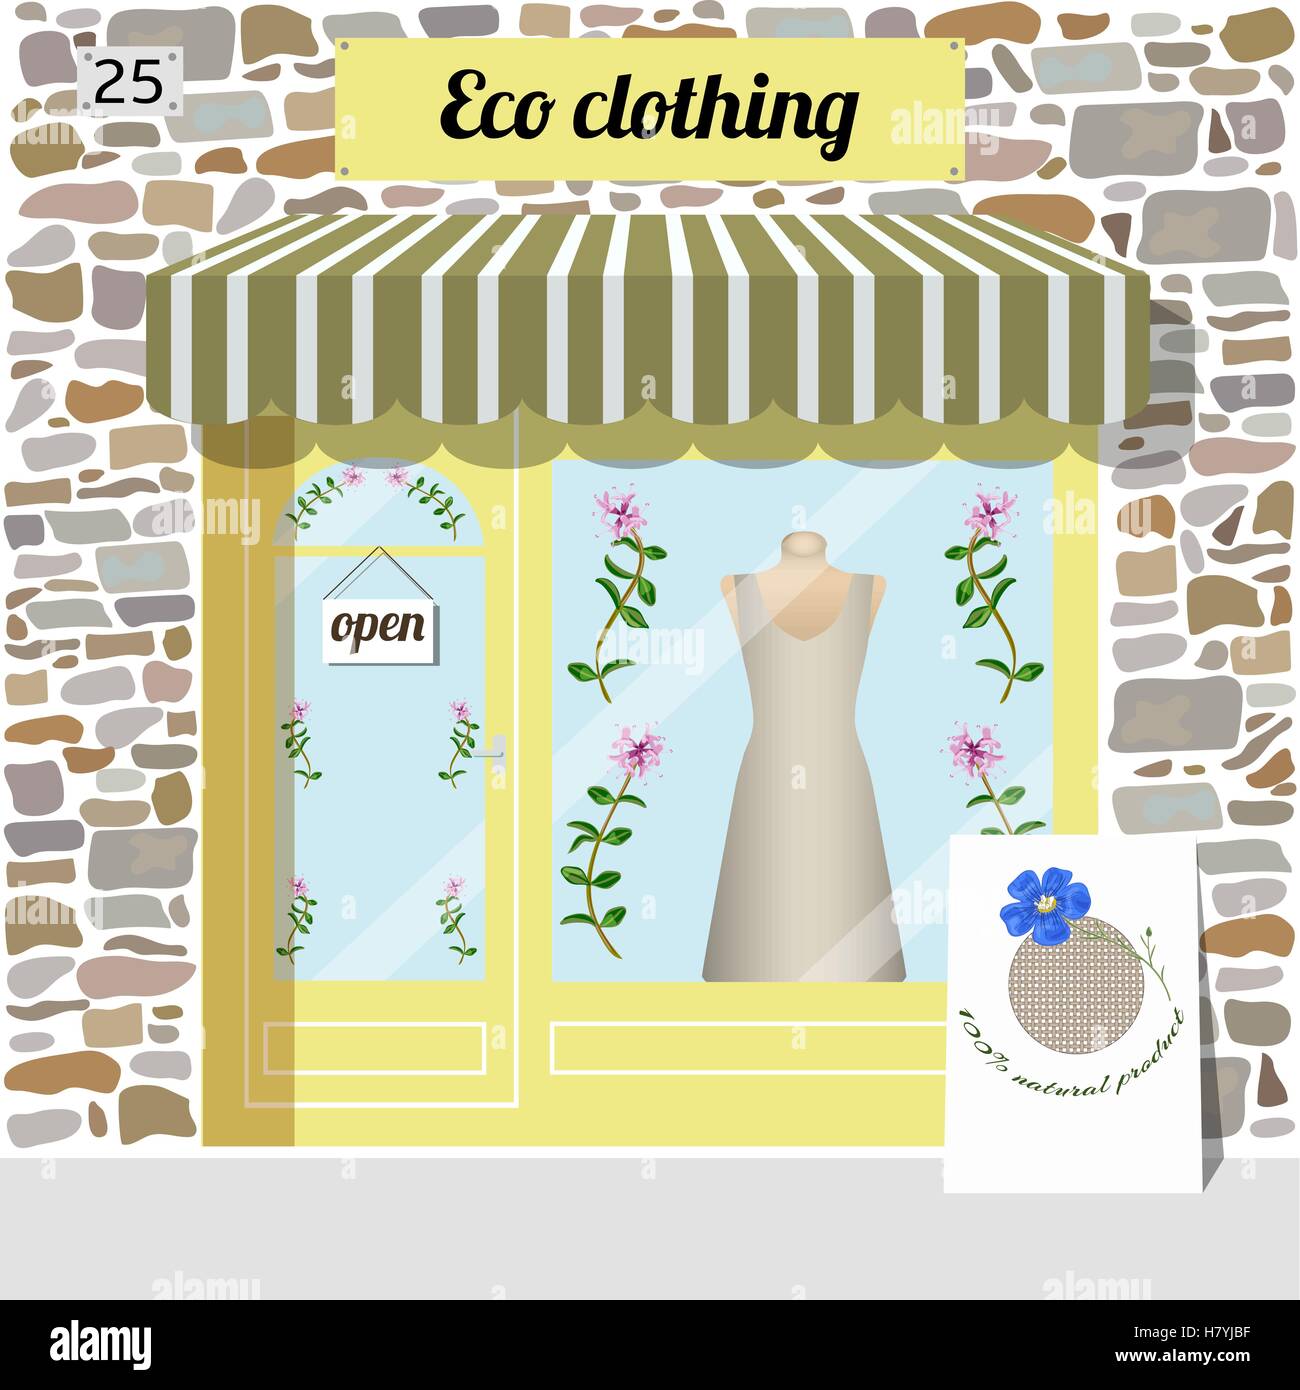 Eco clothing shop. Organic clothes store. Stock Vector